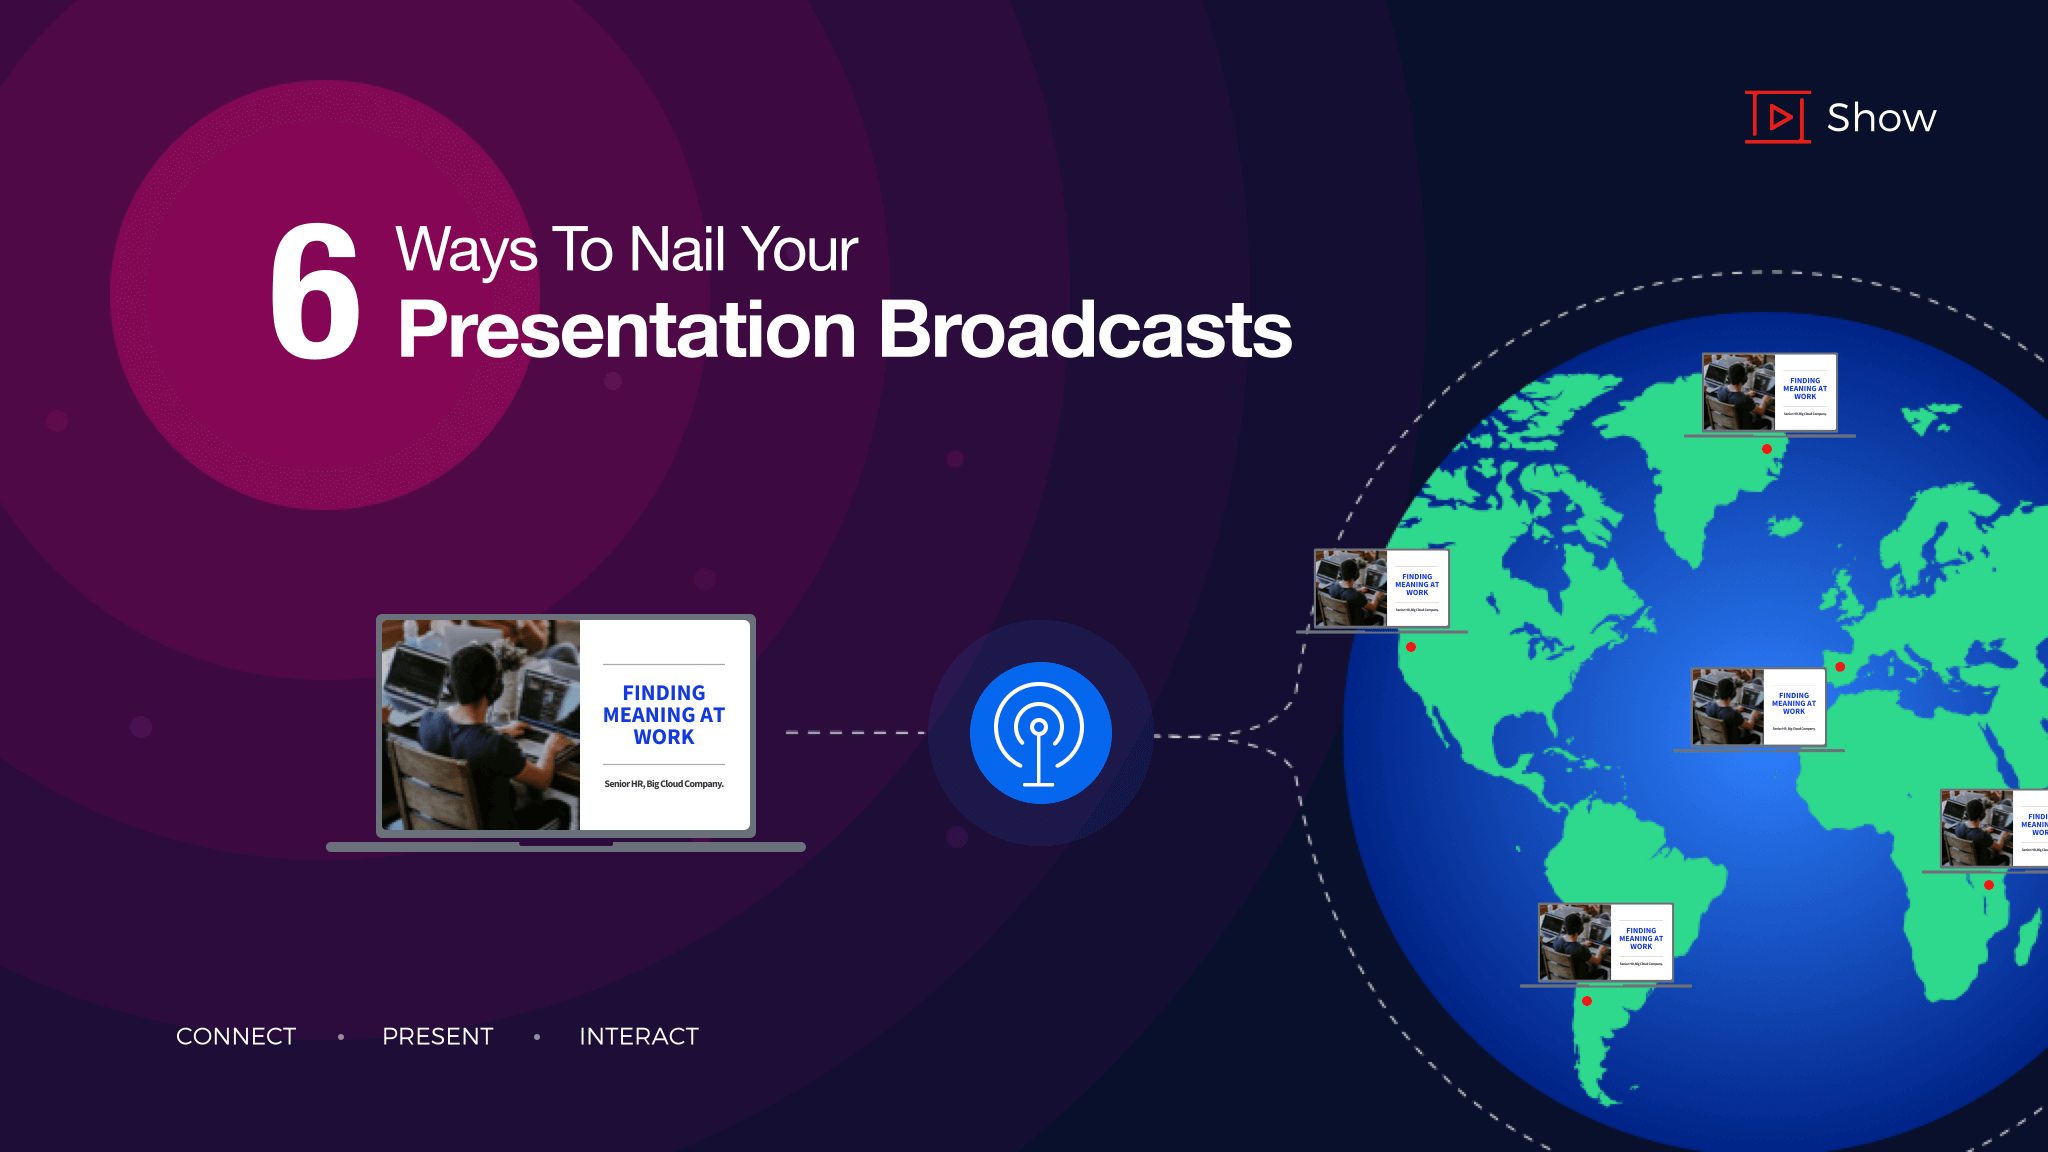 6 killer tips to nail your presentation broadcasts